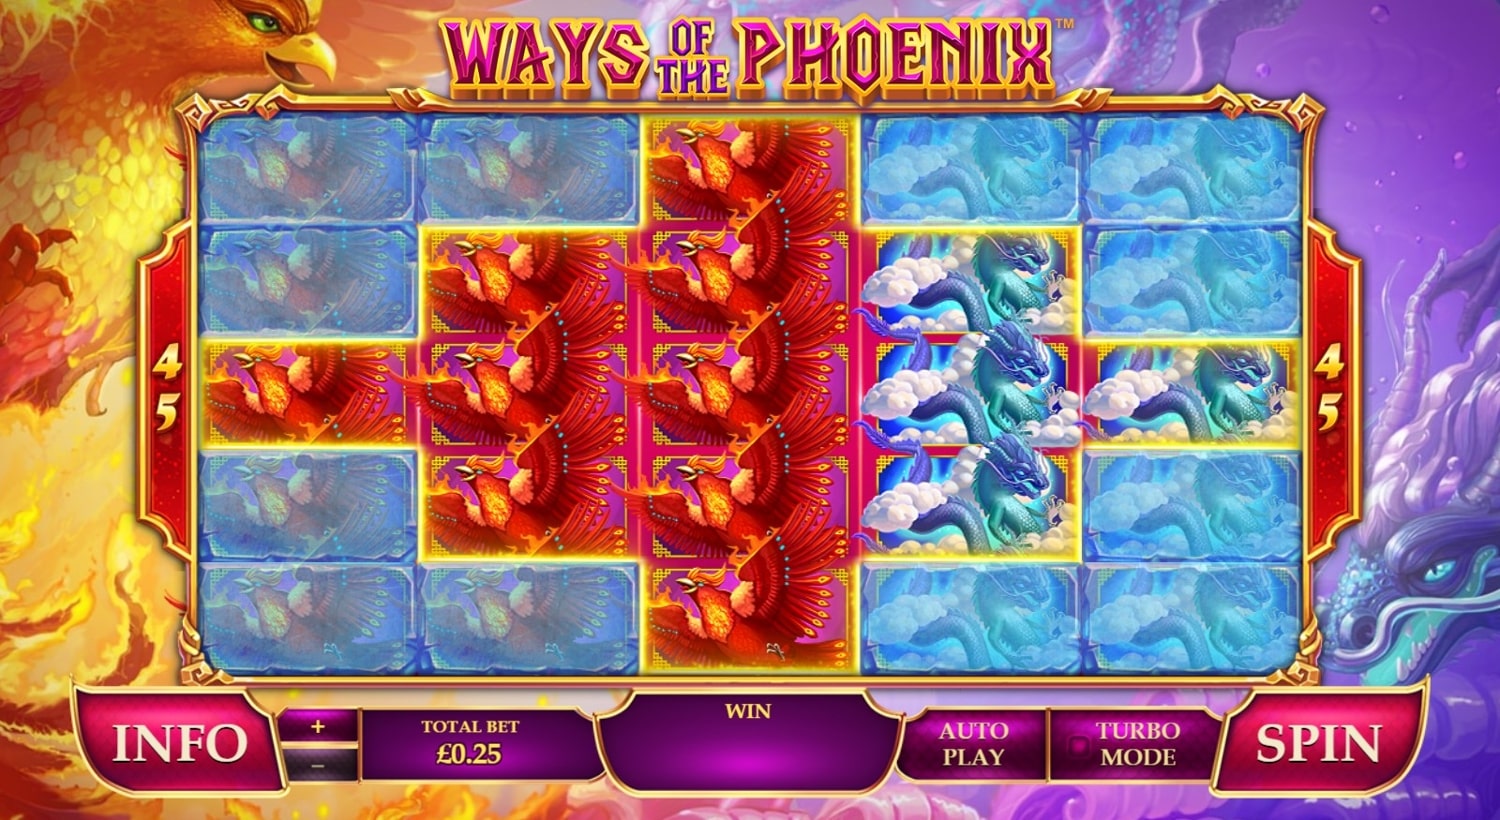 Ways of the Phoenix Free Spins